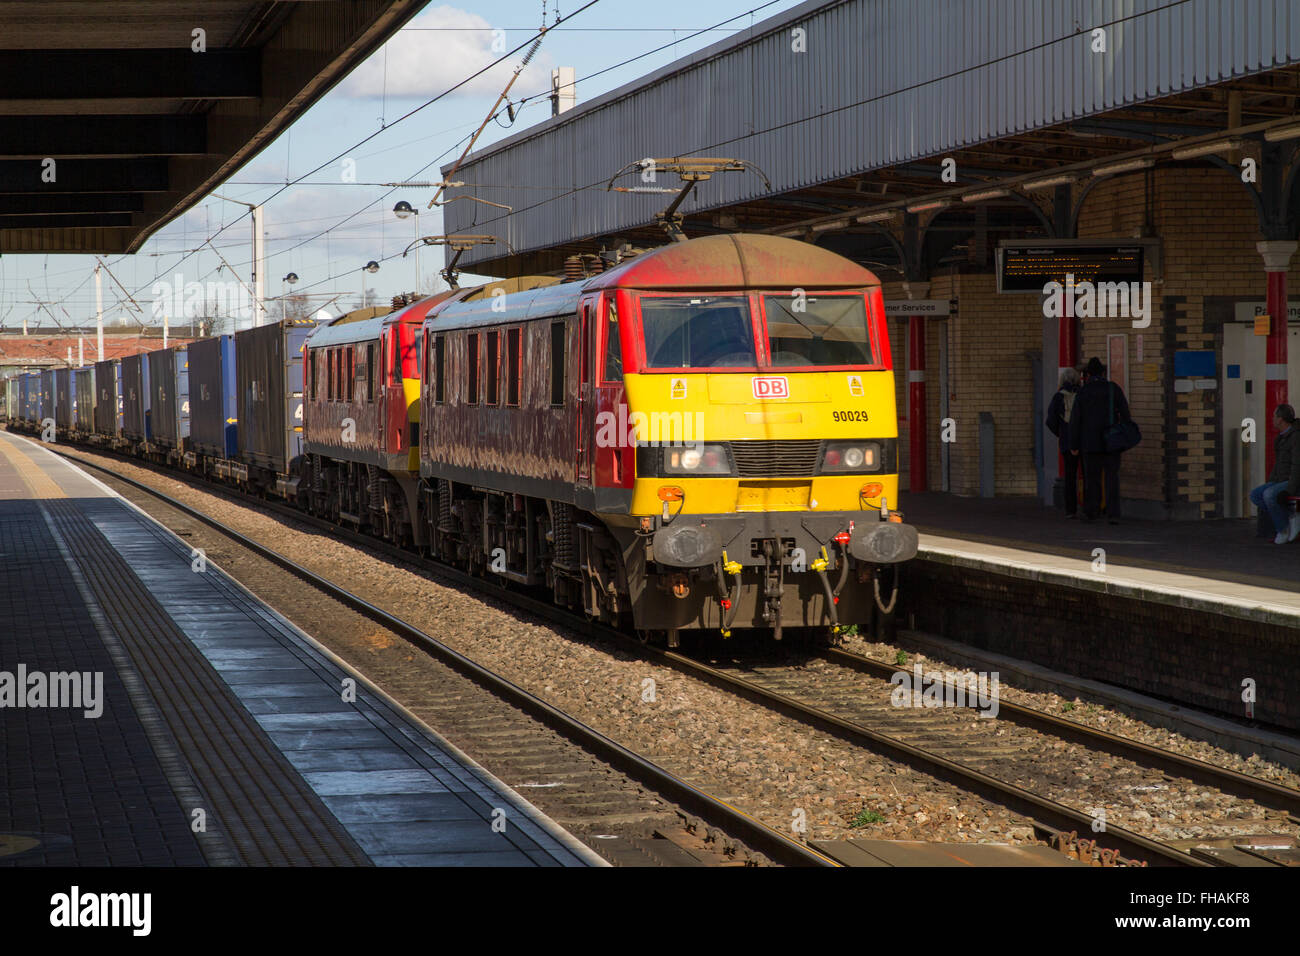 DB Cargo Container Freight Train at Warrington Bank Quay hauled by two Electric Locomotives in DB Red livery in bright sunshine, Warrington, England. Stock Photo